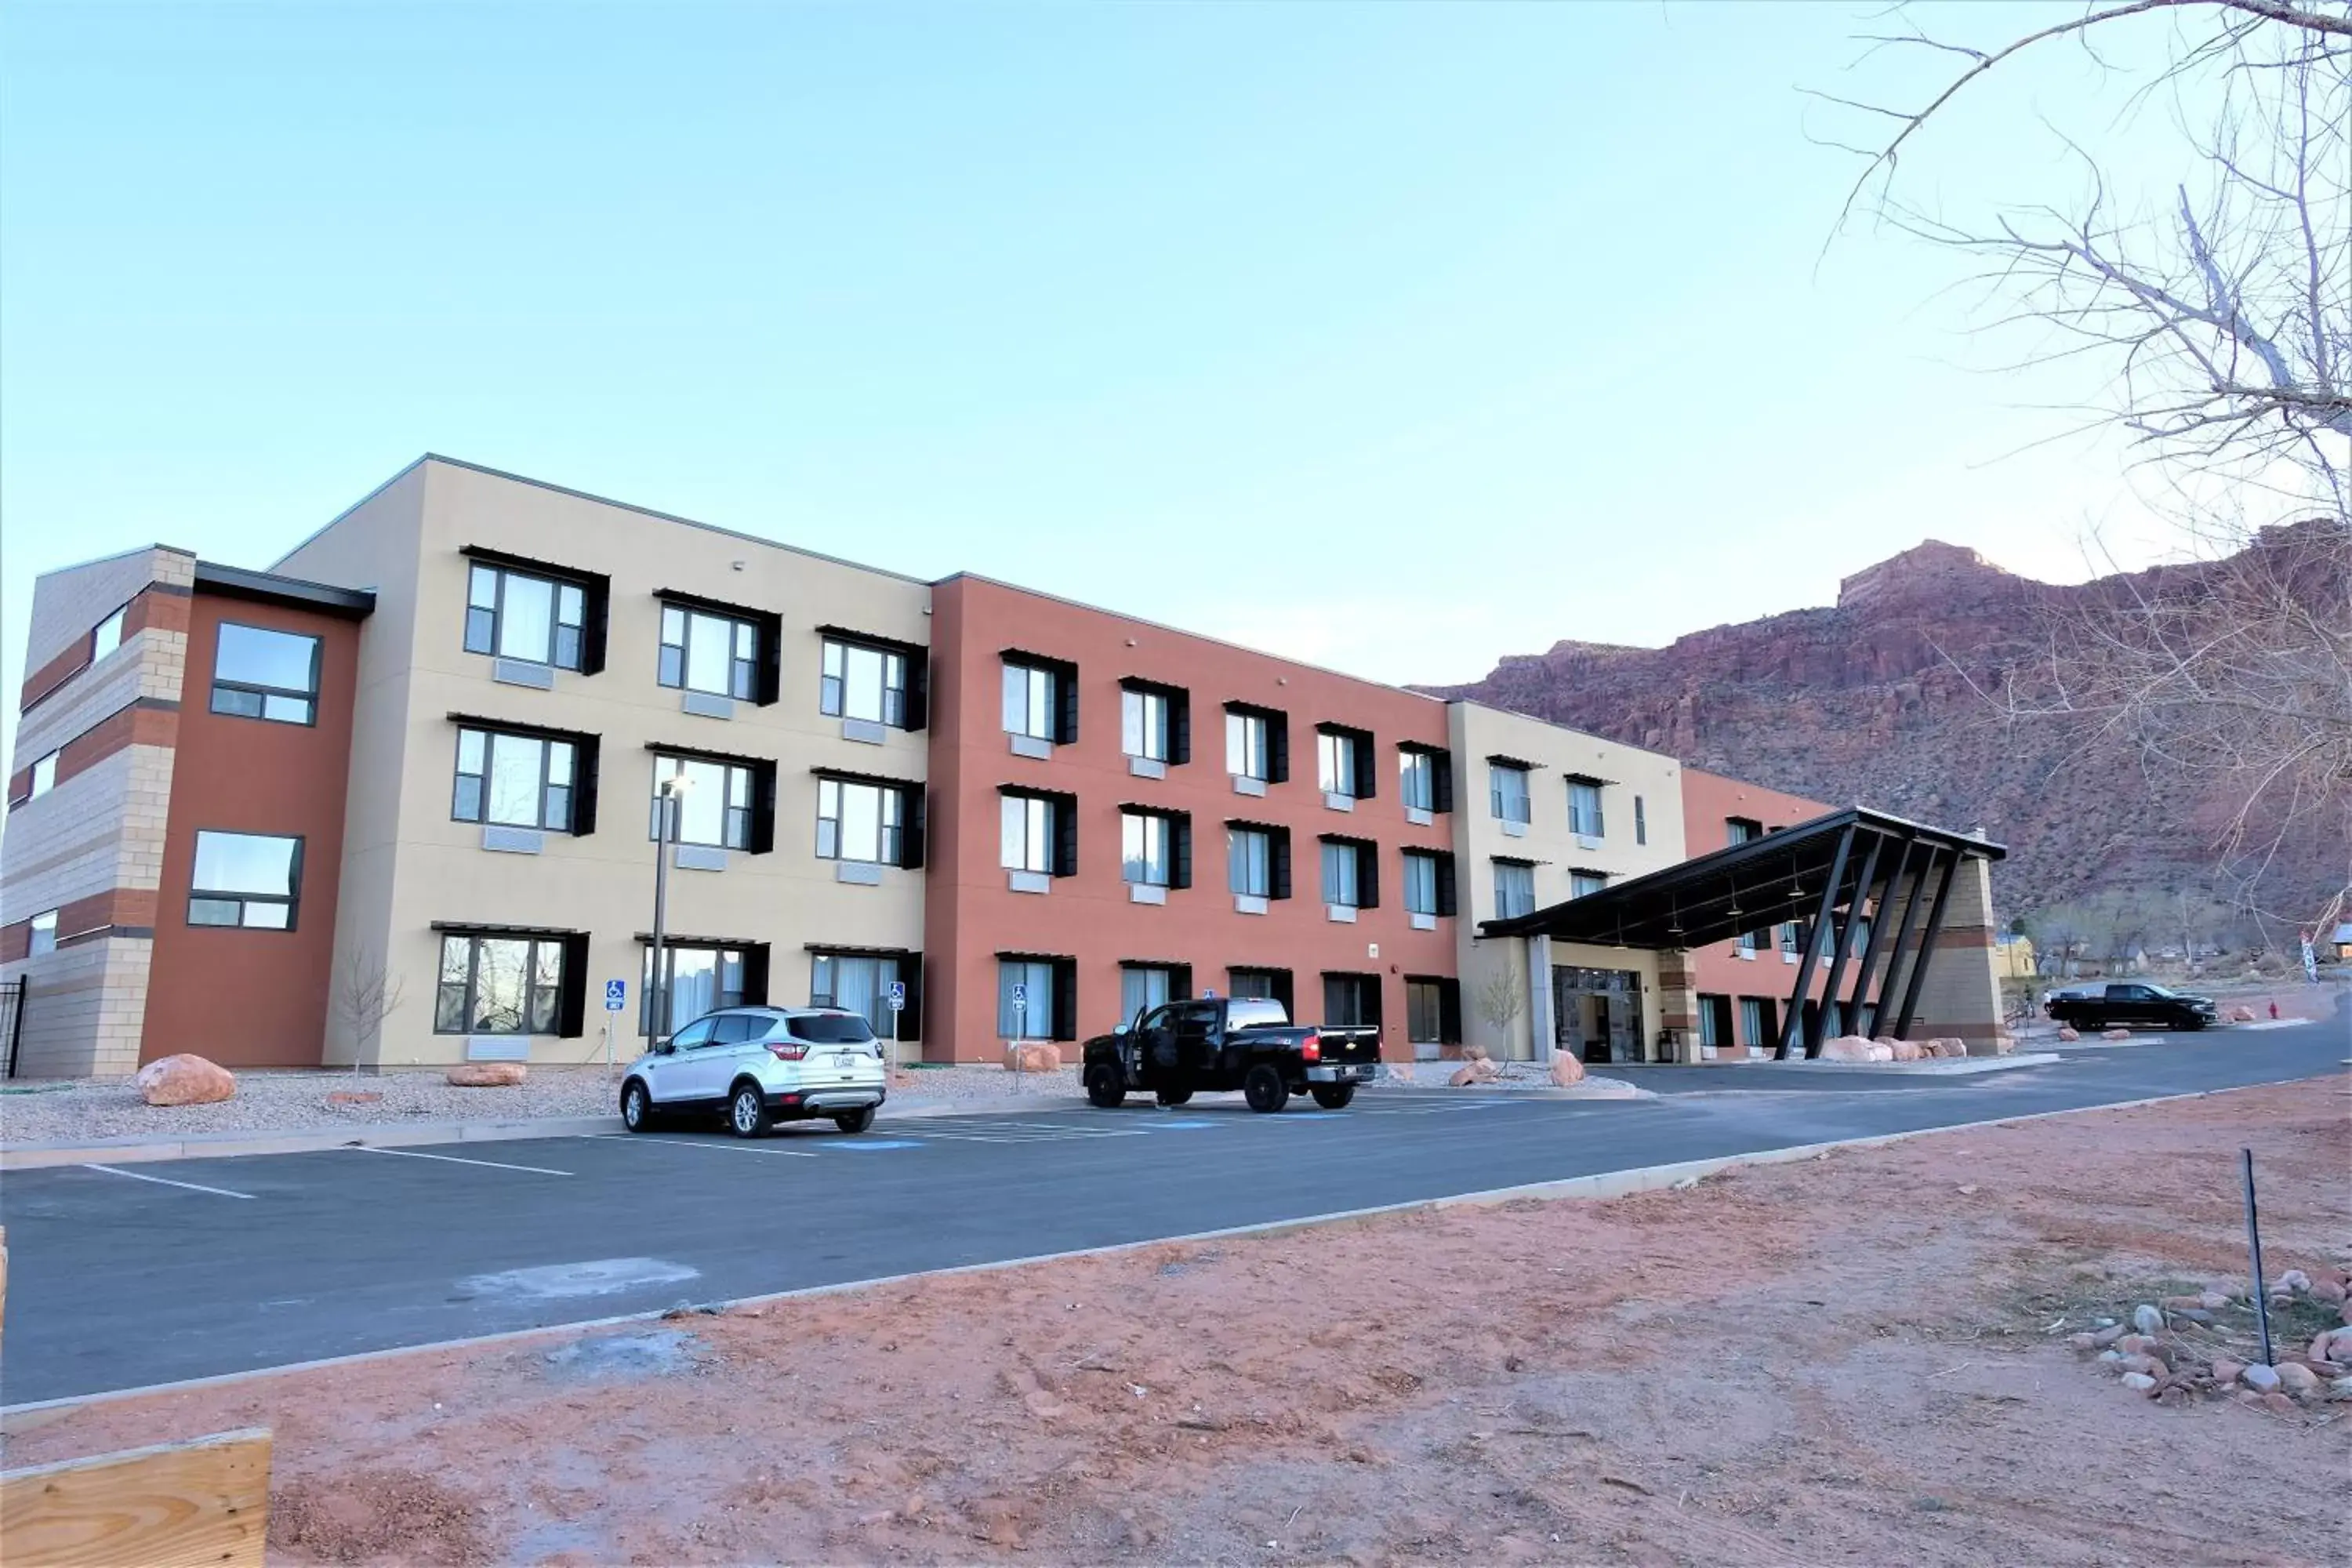 Property Building in Scenic View Inn & Suites Moab